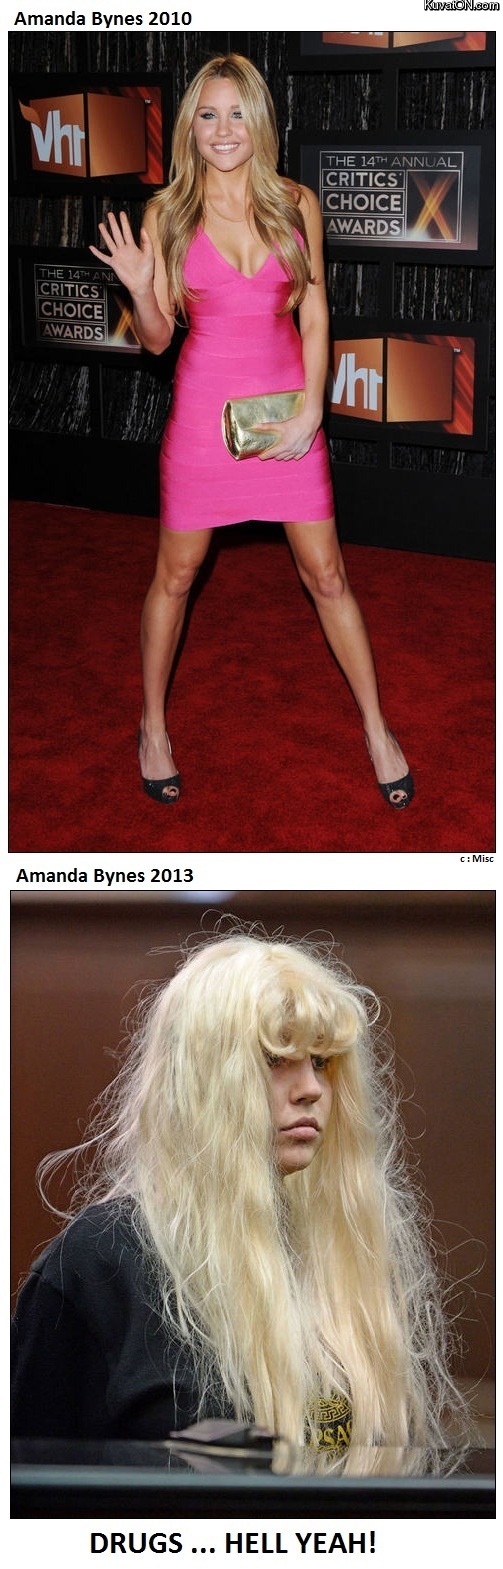 amanda_bynes_arrested_after_she_throws_bong_out_of_hotel_window.jpg